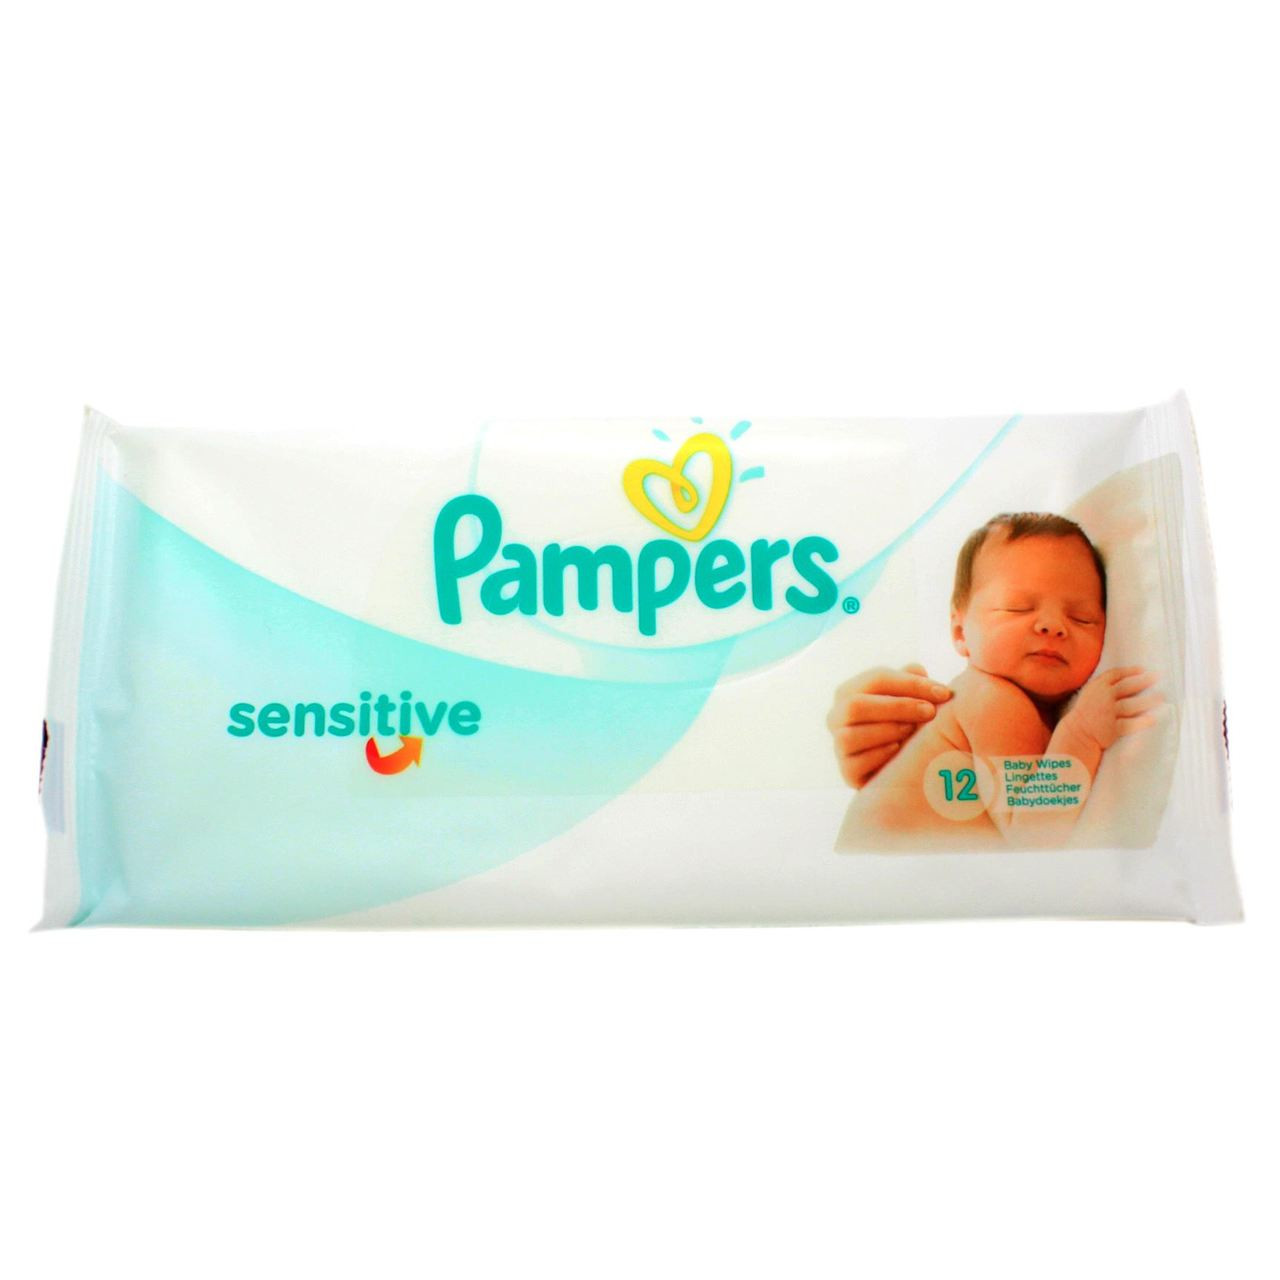 pampers premium are